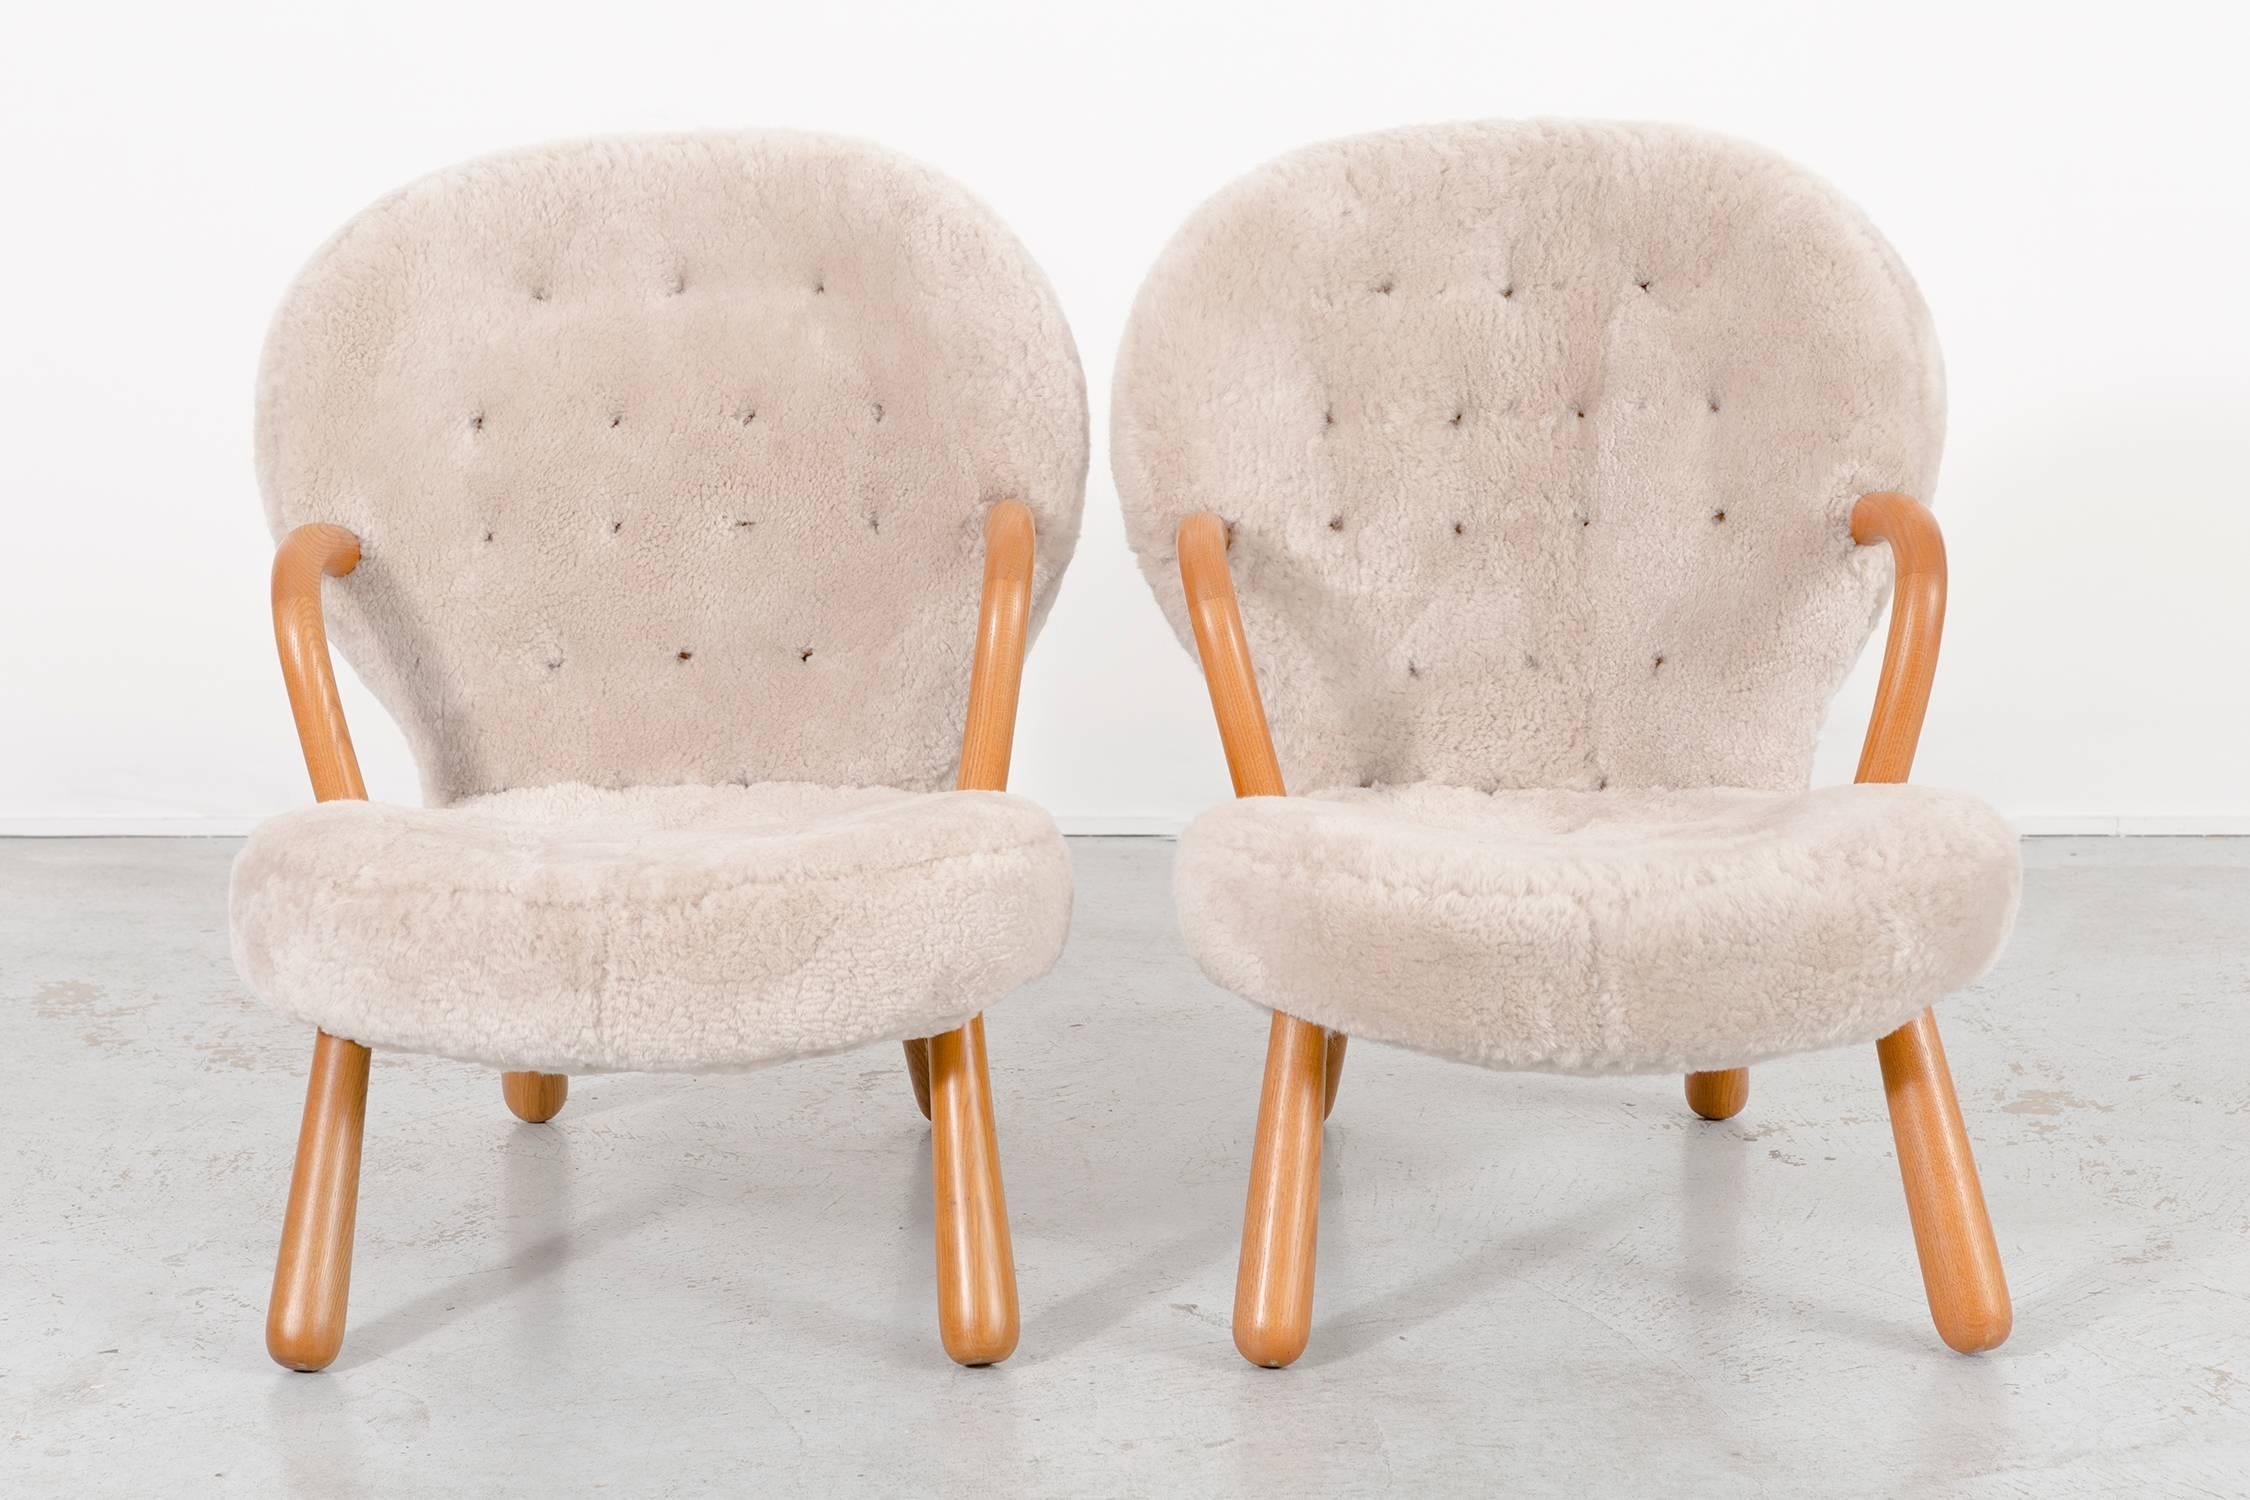 Clam chairs

Designed by Phillip Arctander

Denmark, circa 1940s

Freshly reupholstered in sheepskin with original birch frames

Measures: 33 ?” H x 26 5/16” W x 29 ?” D x seat 15 13/16” 

Sold as a set.